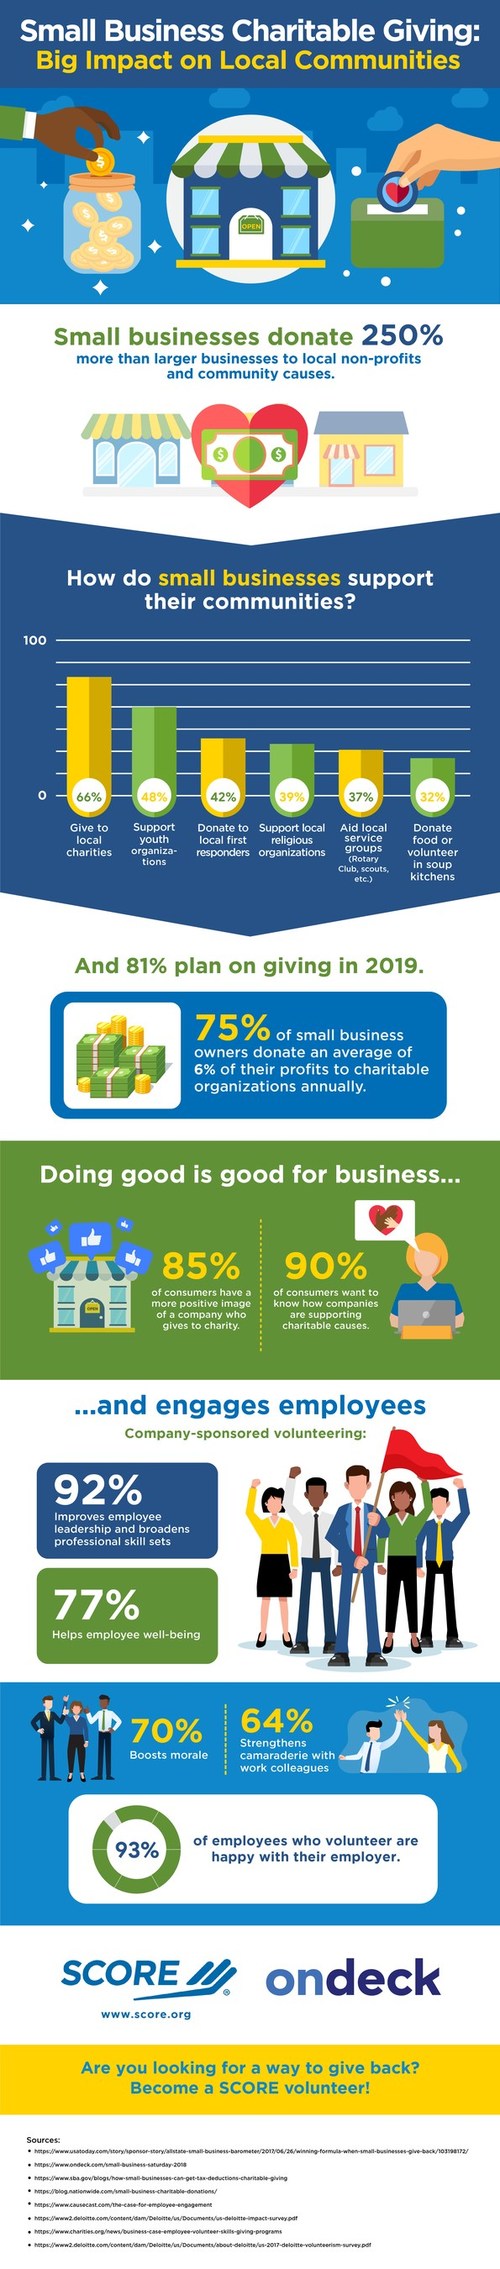 Small businesses donate 250% more than larger businesses to local nonprofits and community causes, according to data compiled by SCORE, the nation’s largest network of volunteer, expert business mentors. This trend is predicted to remain strong, with 81% of small businesses planning to continue giving in 2019.